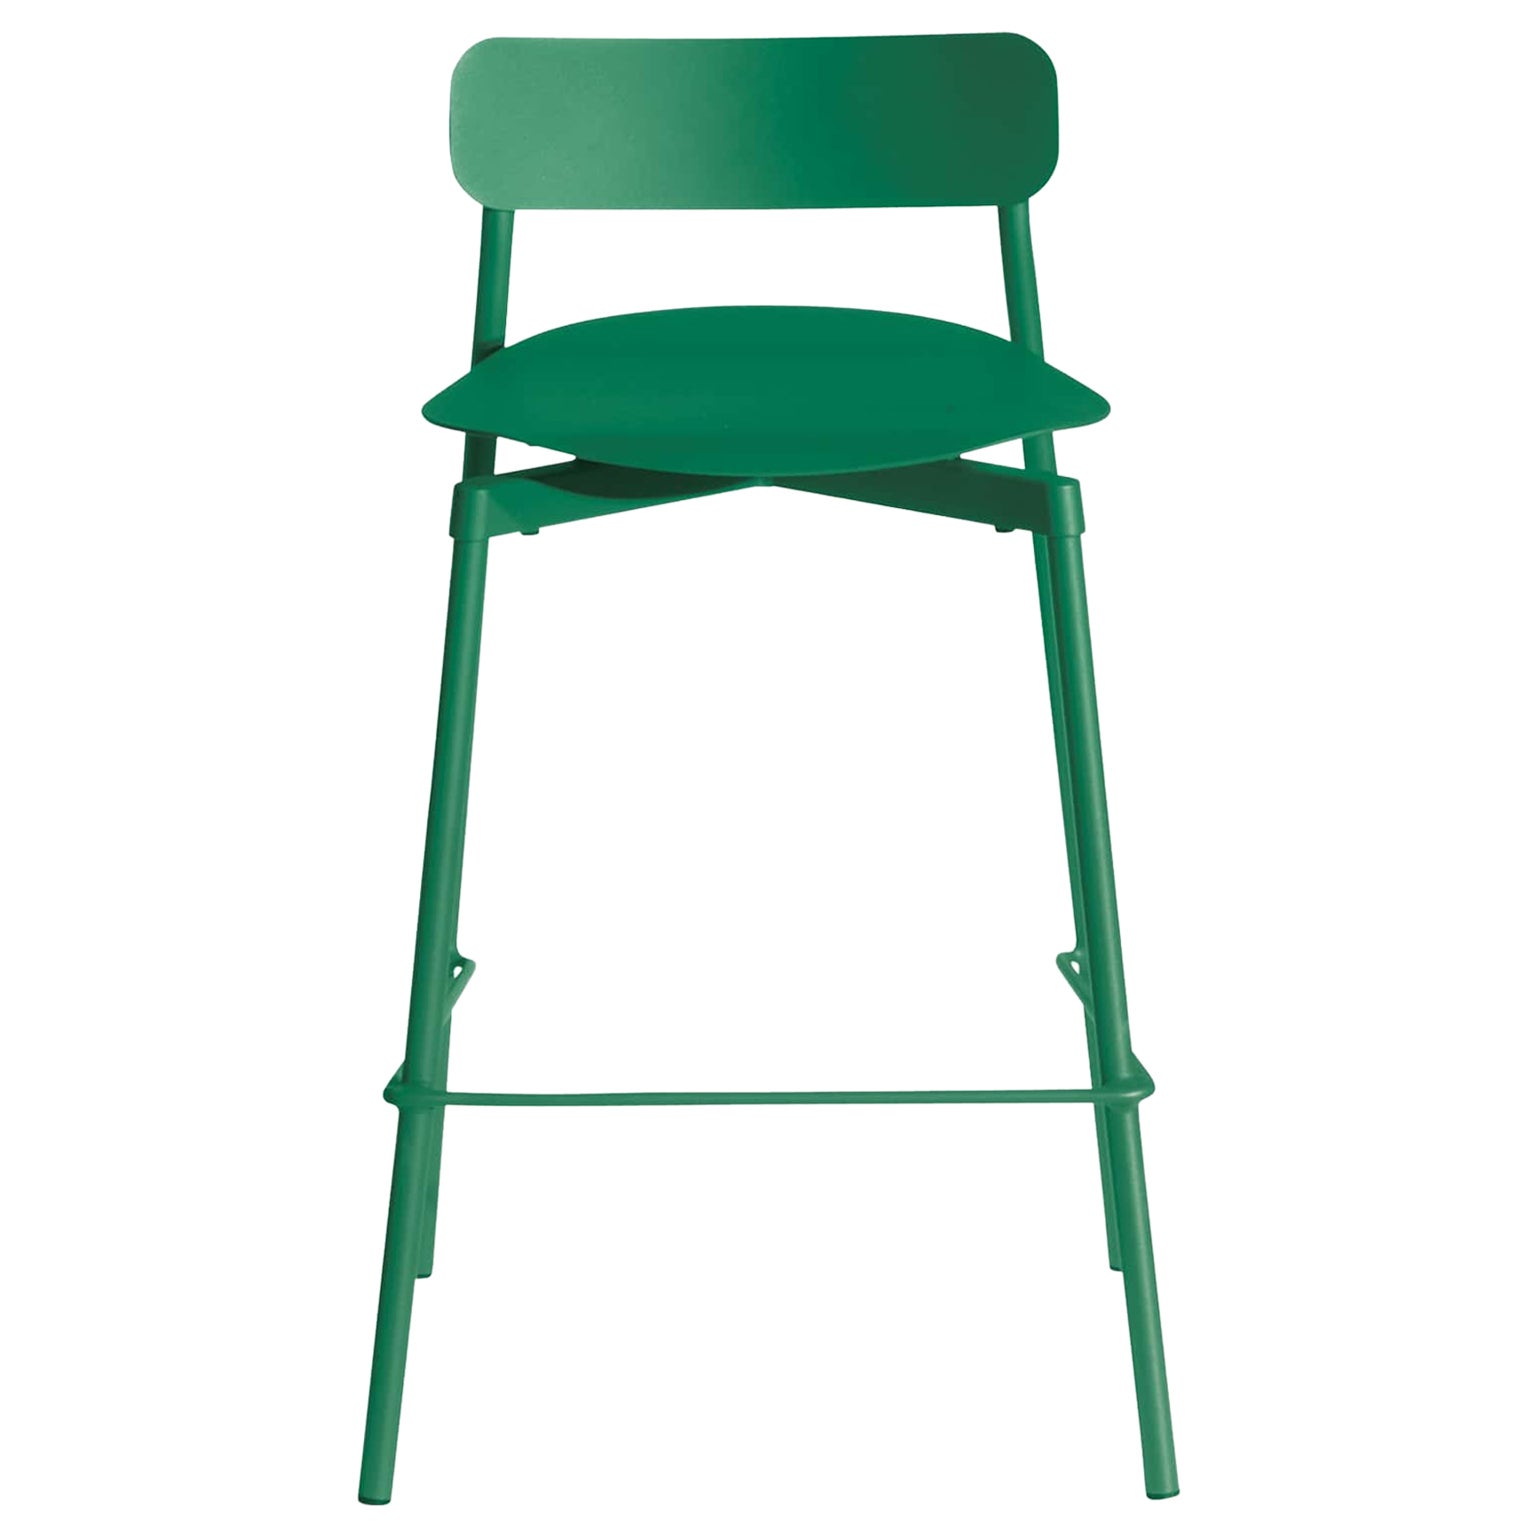 Petite Friture Small Fromme Bar Stool in Mint-Green Aluminium by Tom Chung